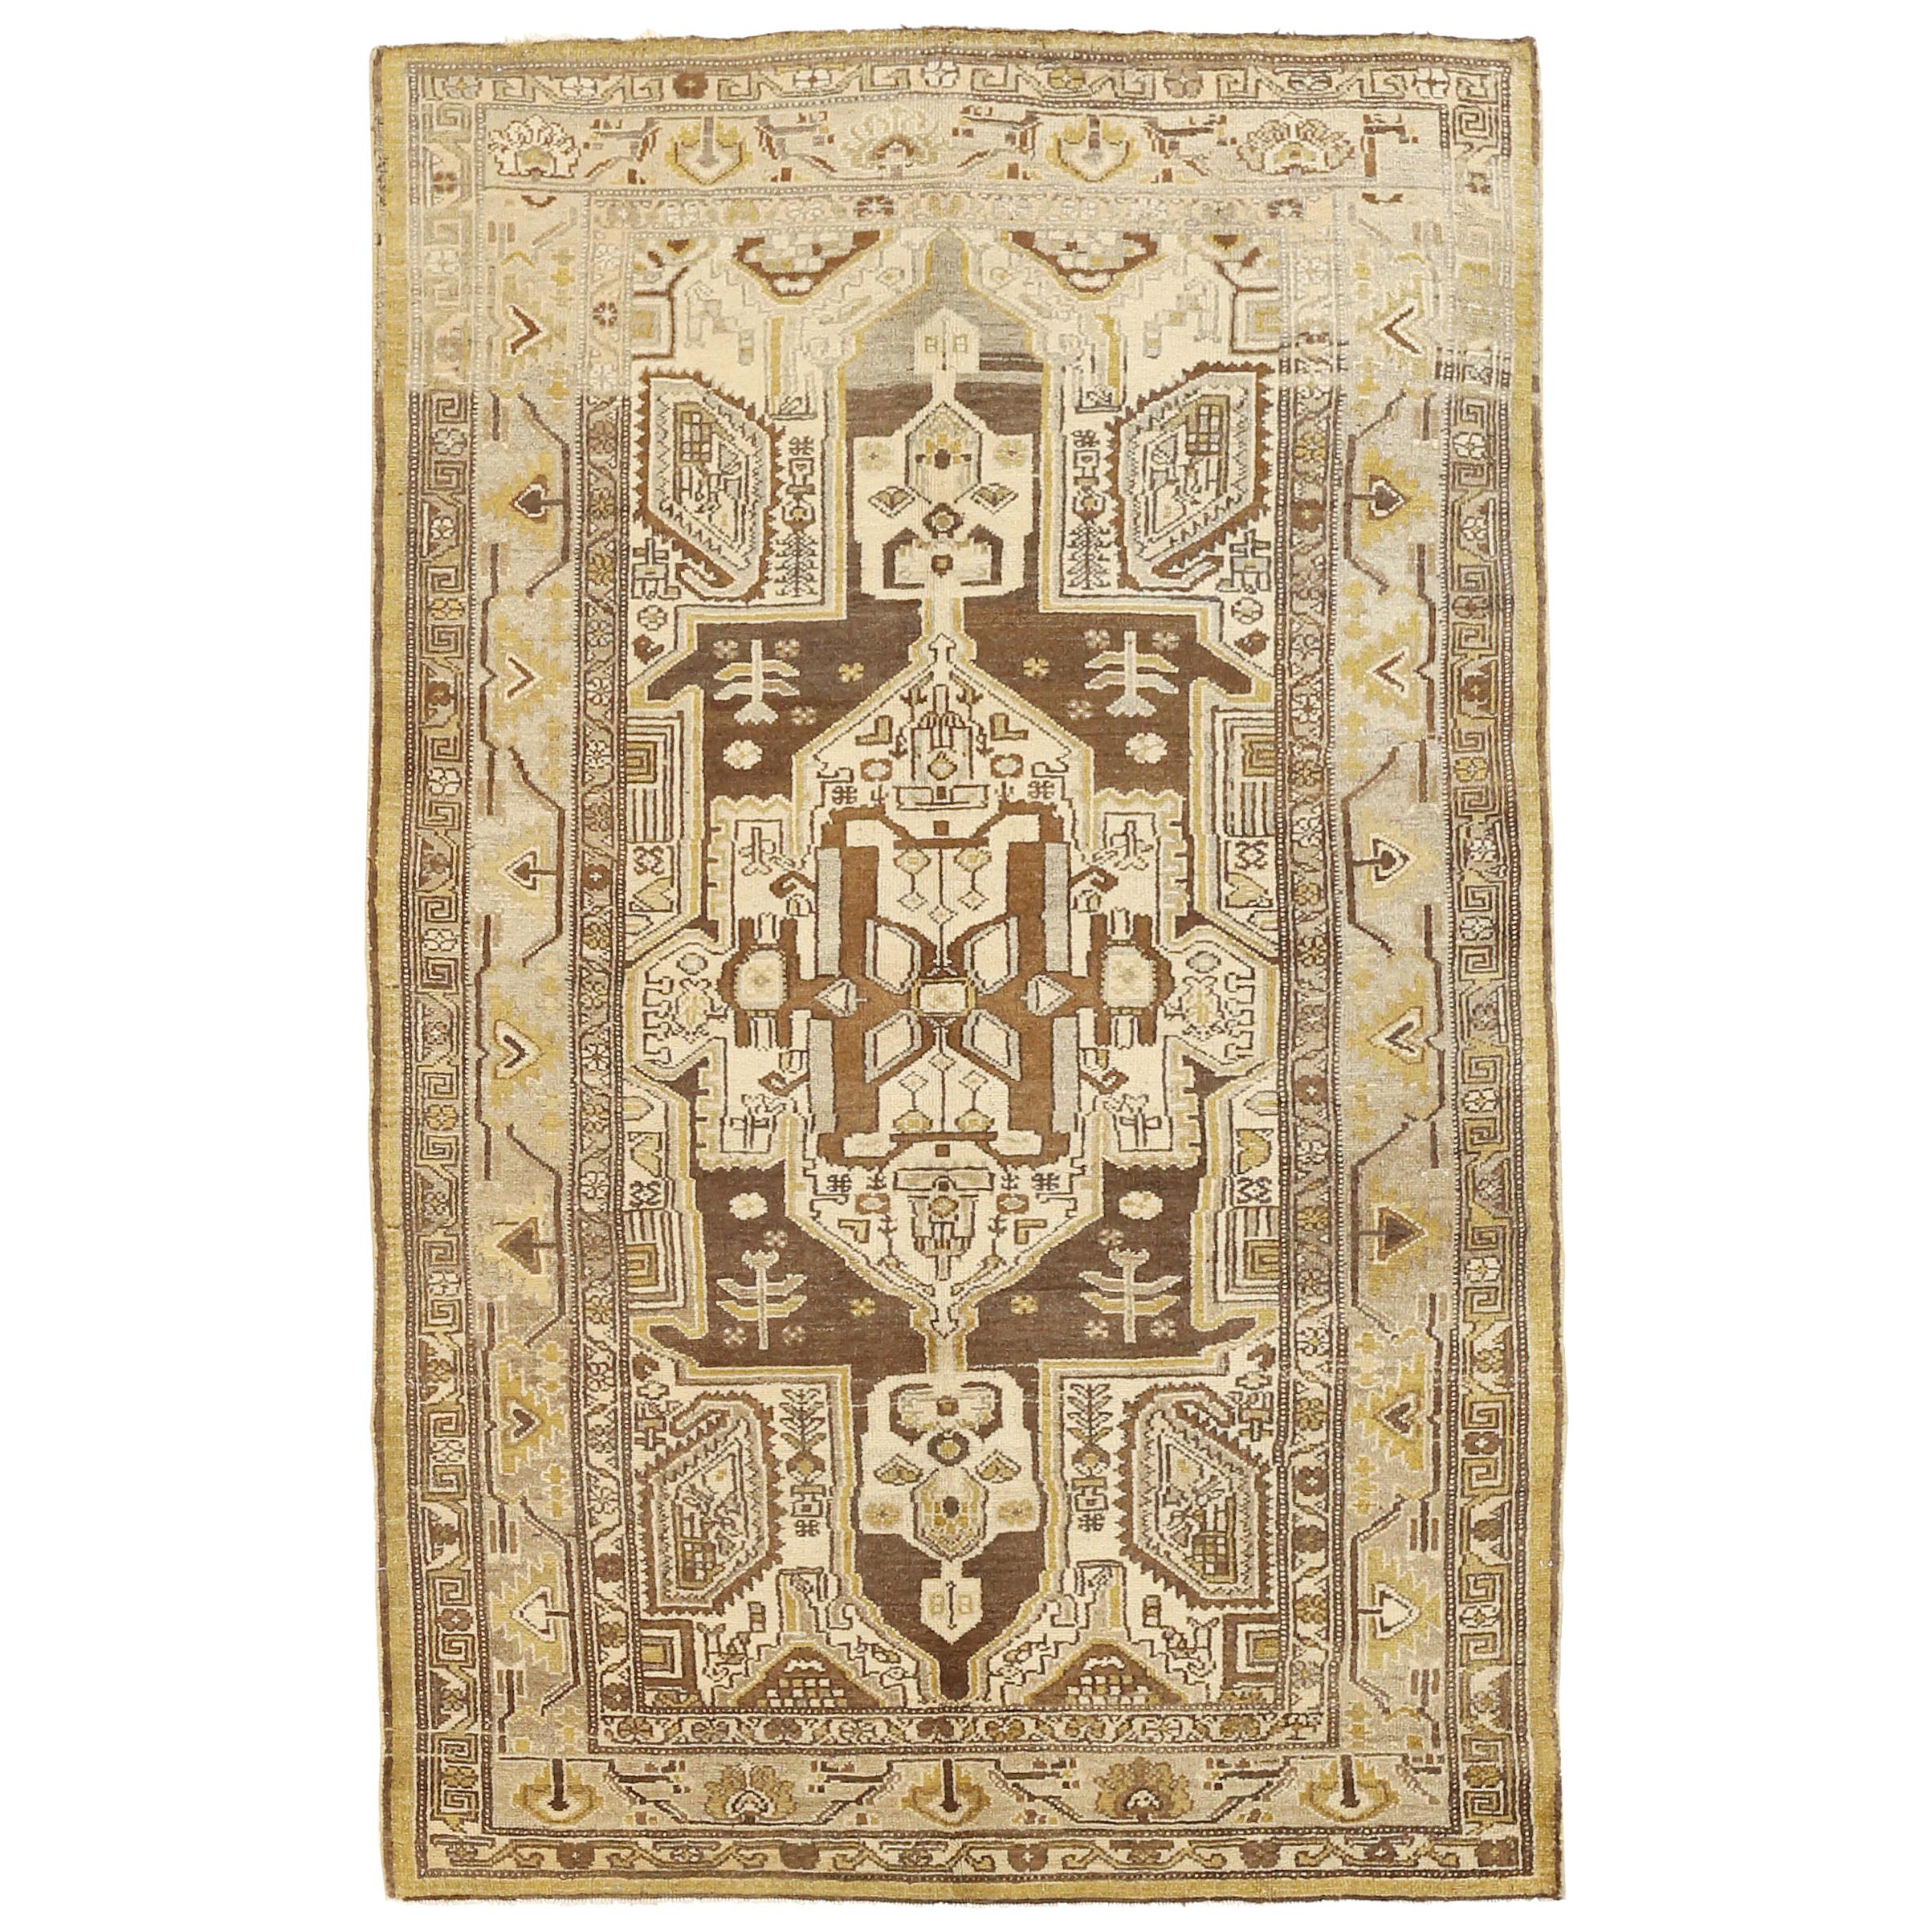 Antique Persian Zanjan Rug with Gold and Brown Tribal Details on Ivory Field